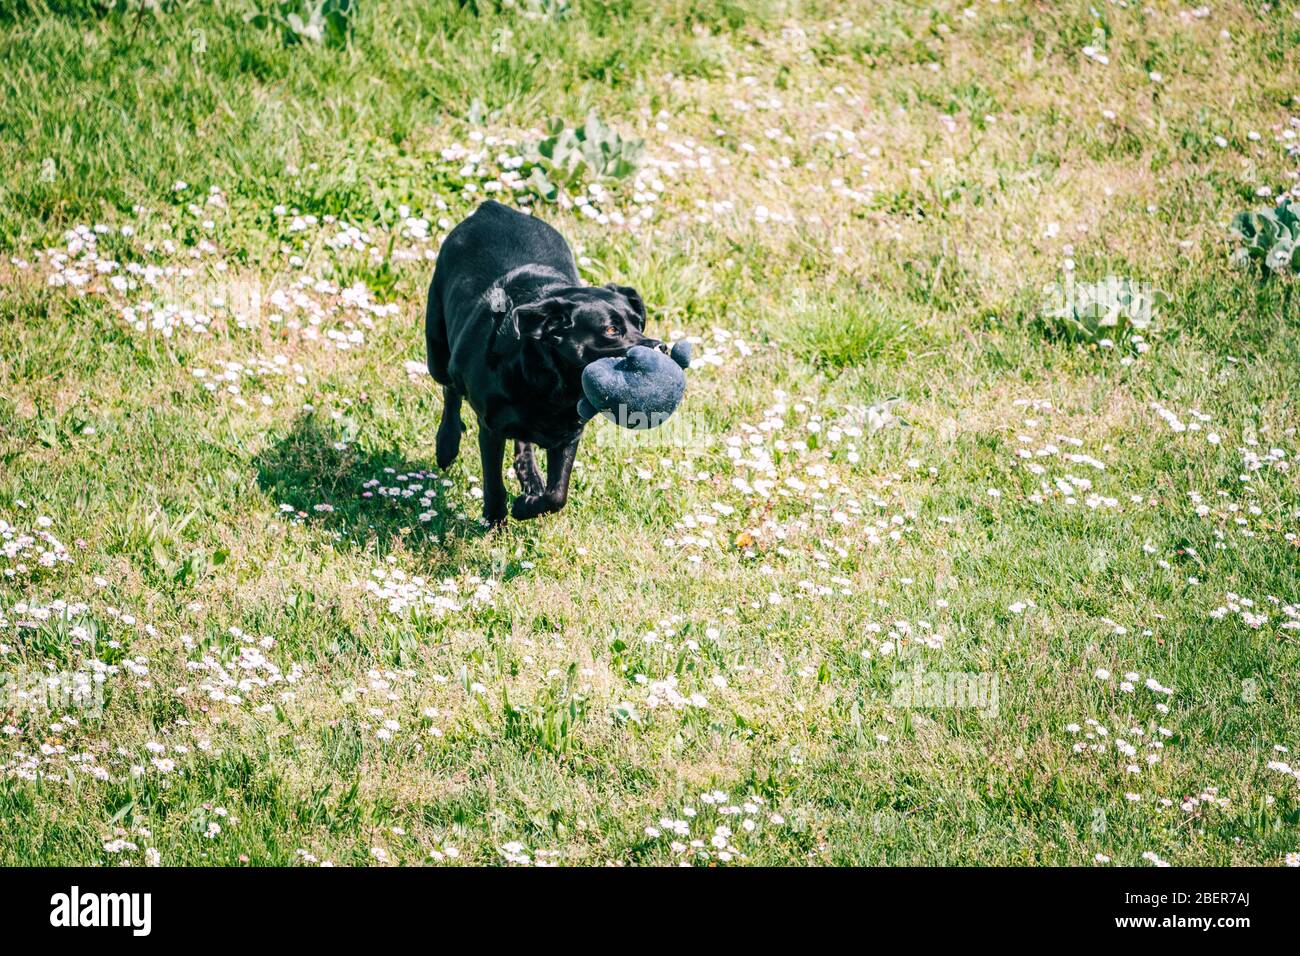 Dog playing in a green spring field. Going out for a walk and playing with the dog on a sunny day. Stock Photo